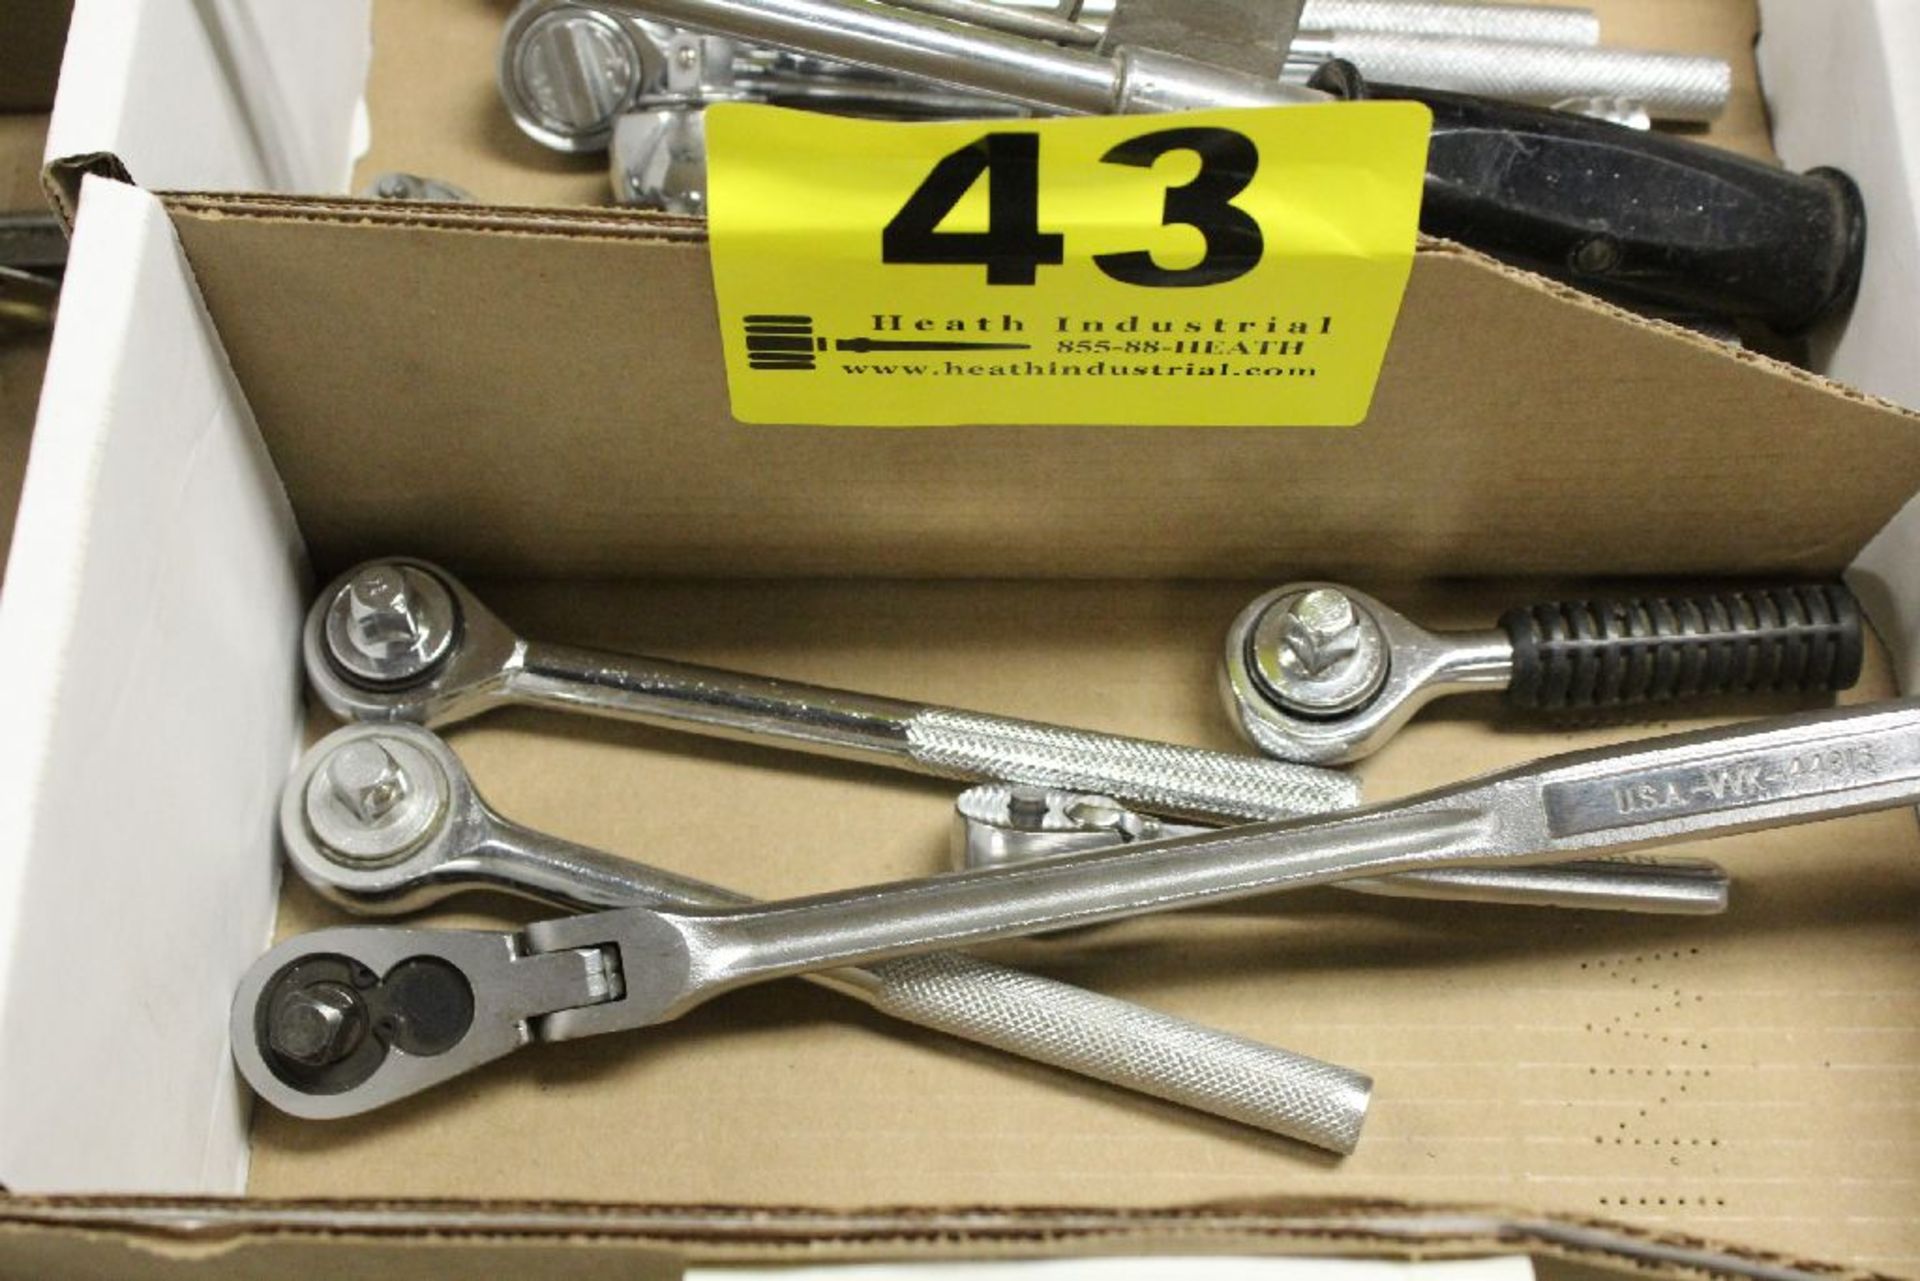 ASSORTED SOCKET WRENCHES IN BOX